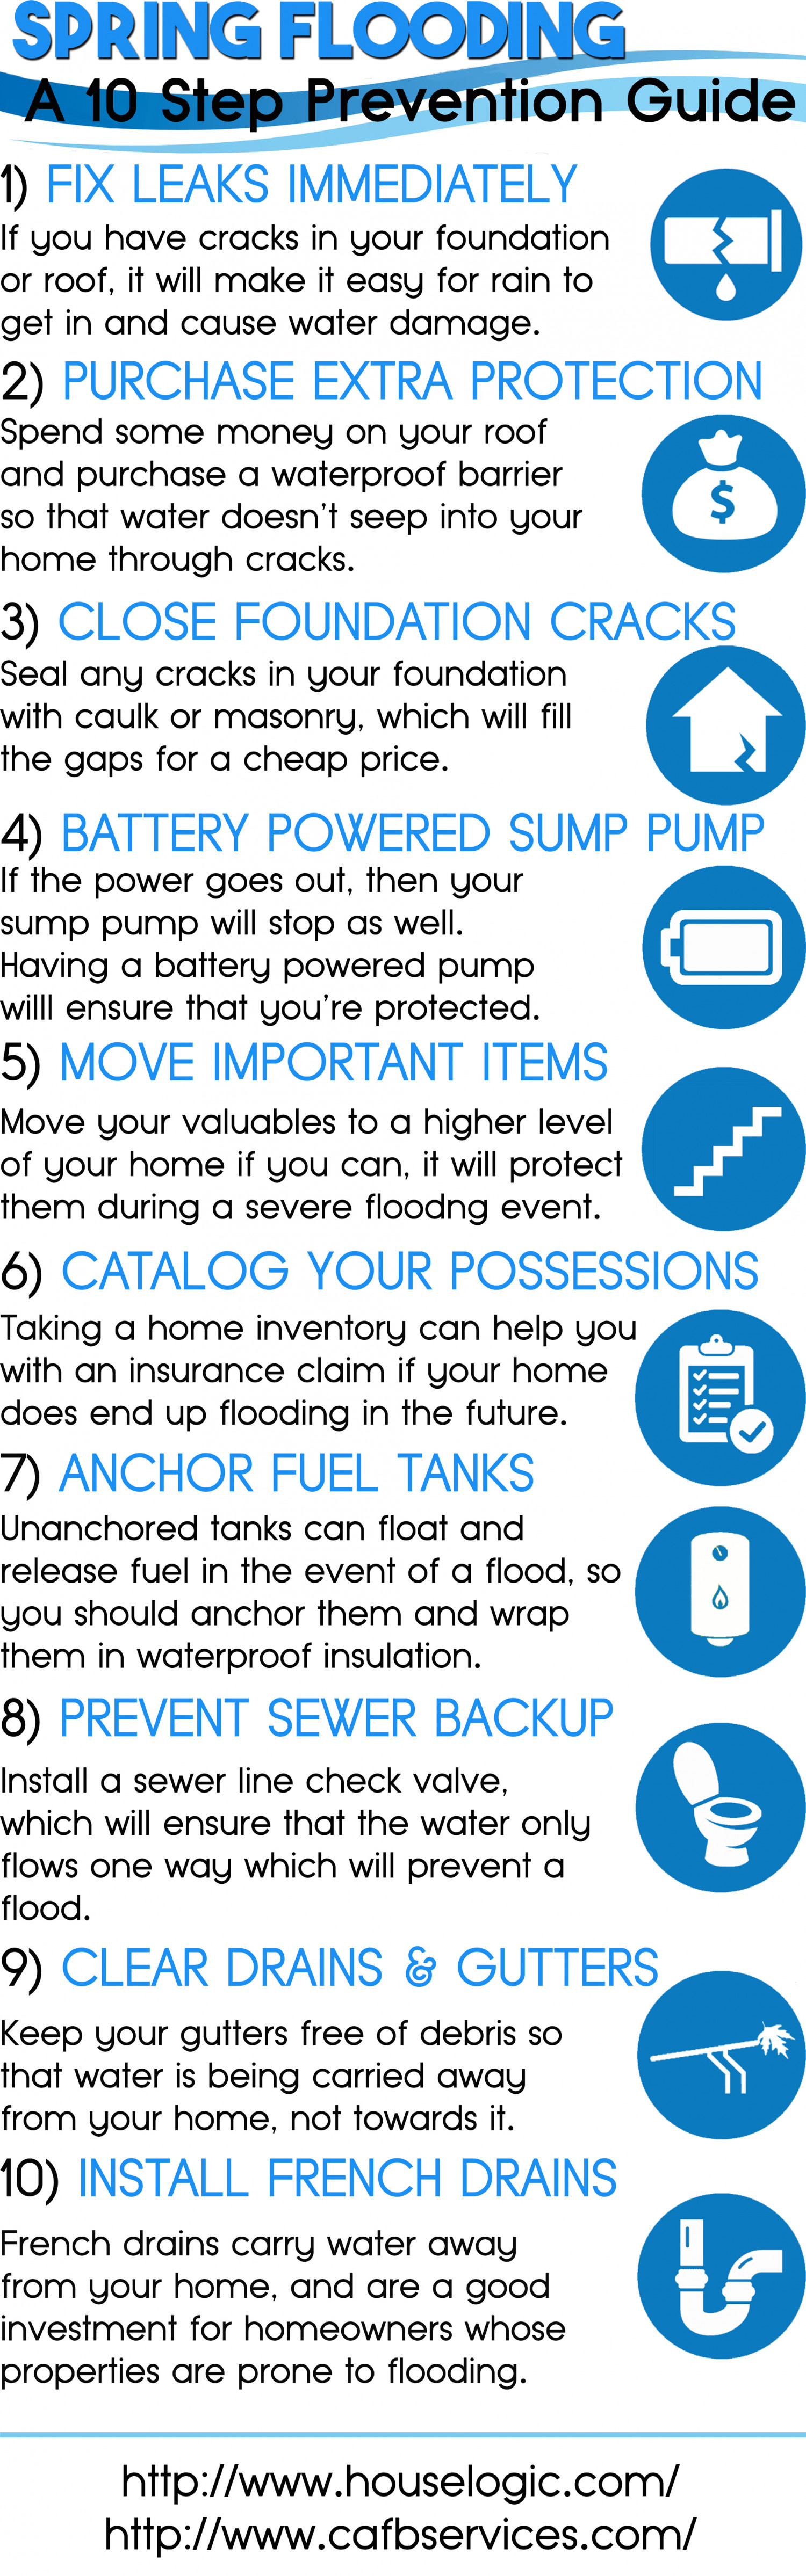 10 Spring Flooding Prevention Tips Infographic